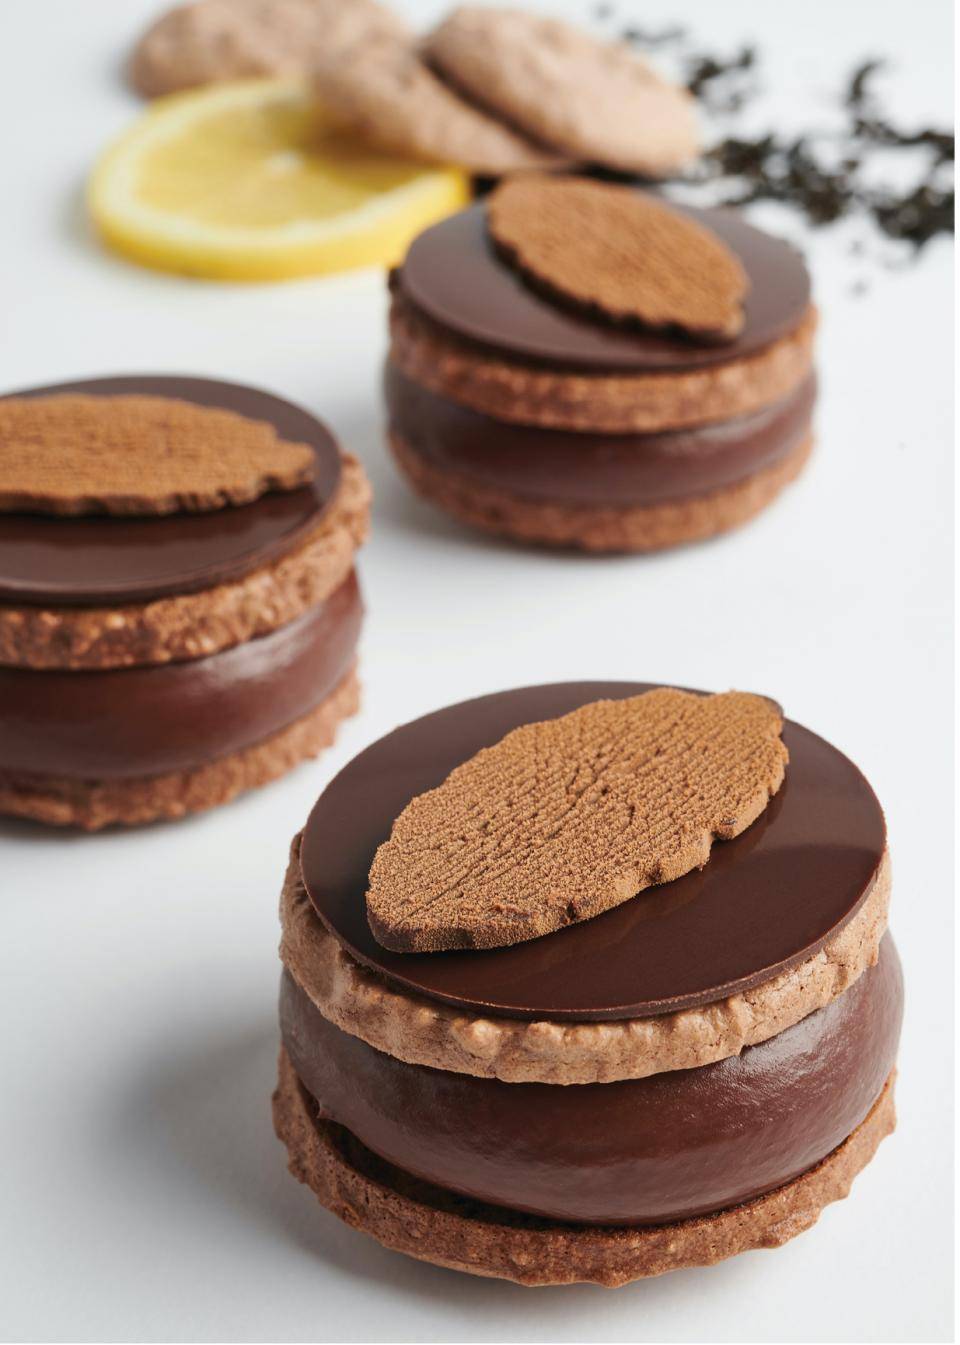 Upcycled Chocolate Macarons by Chef Nicolas Dutertre